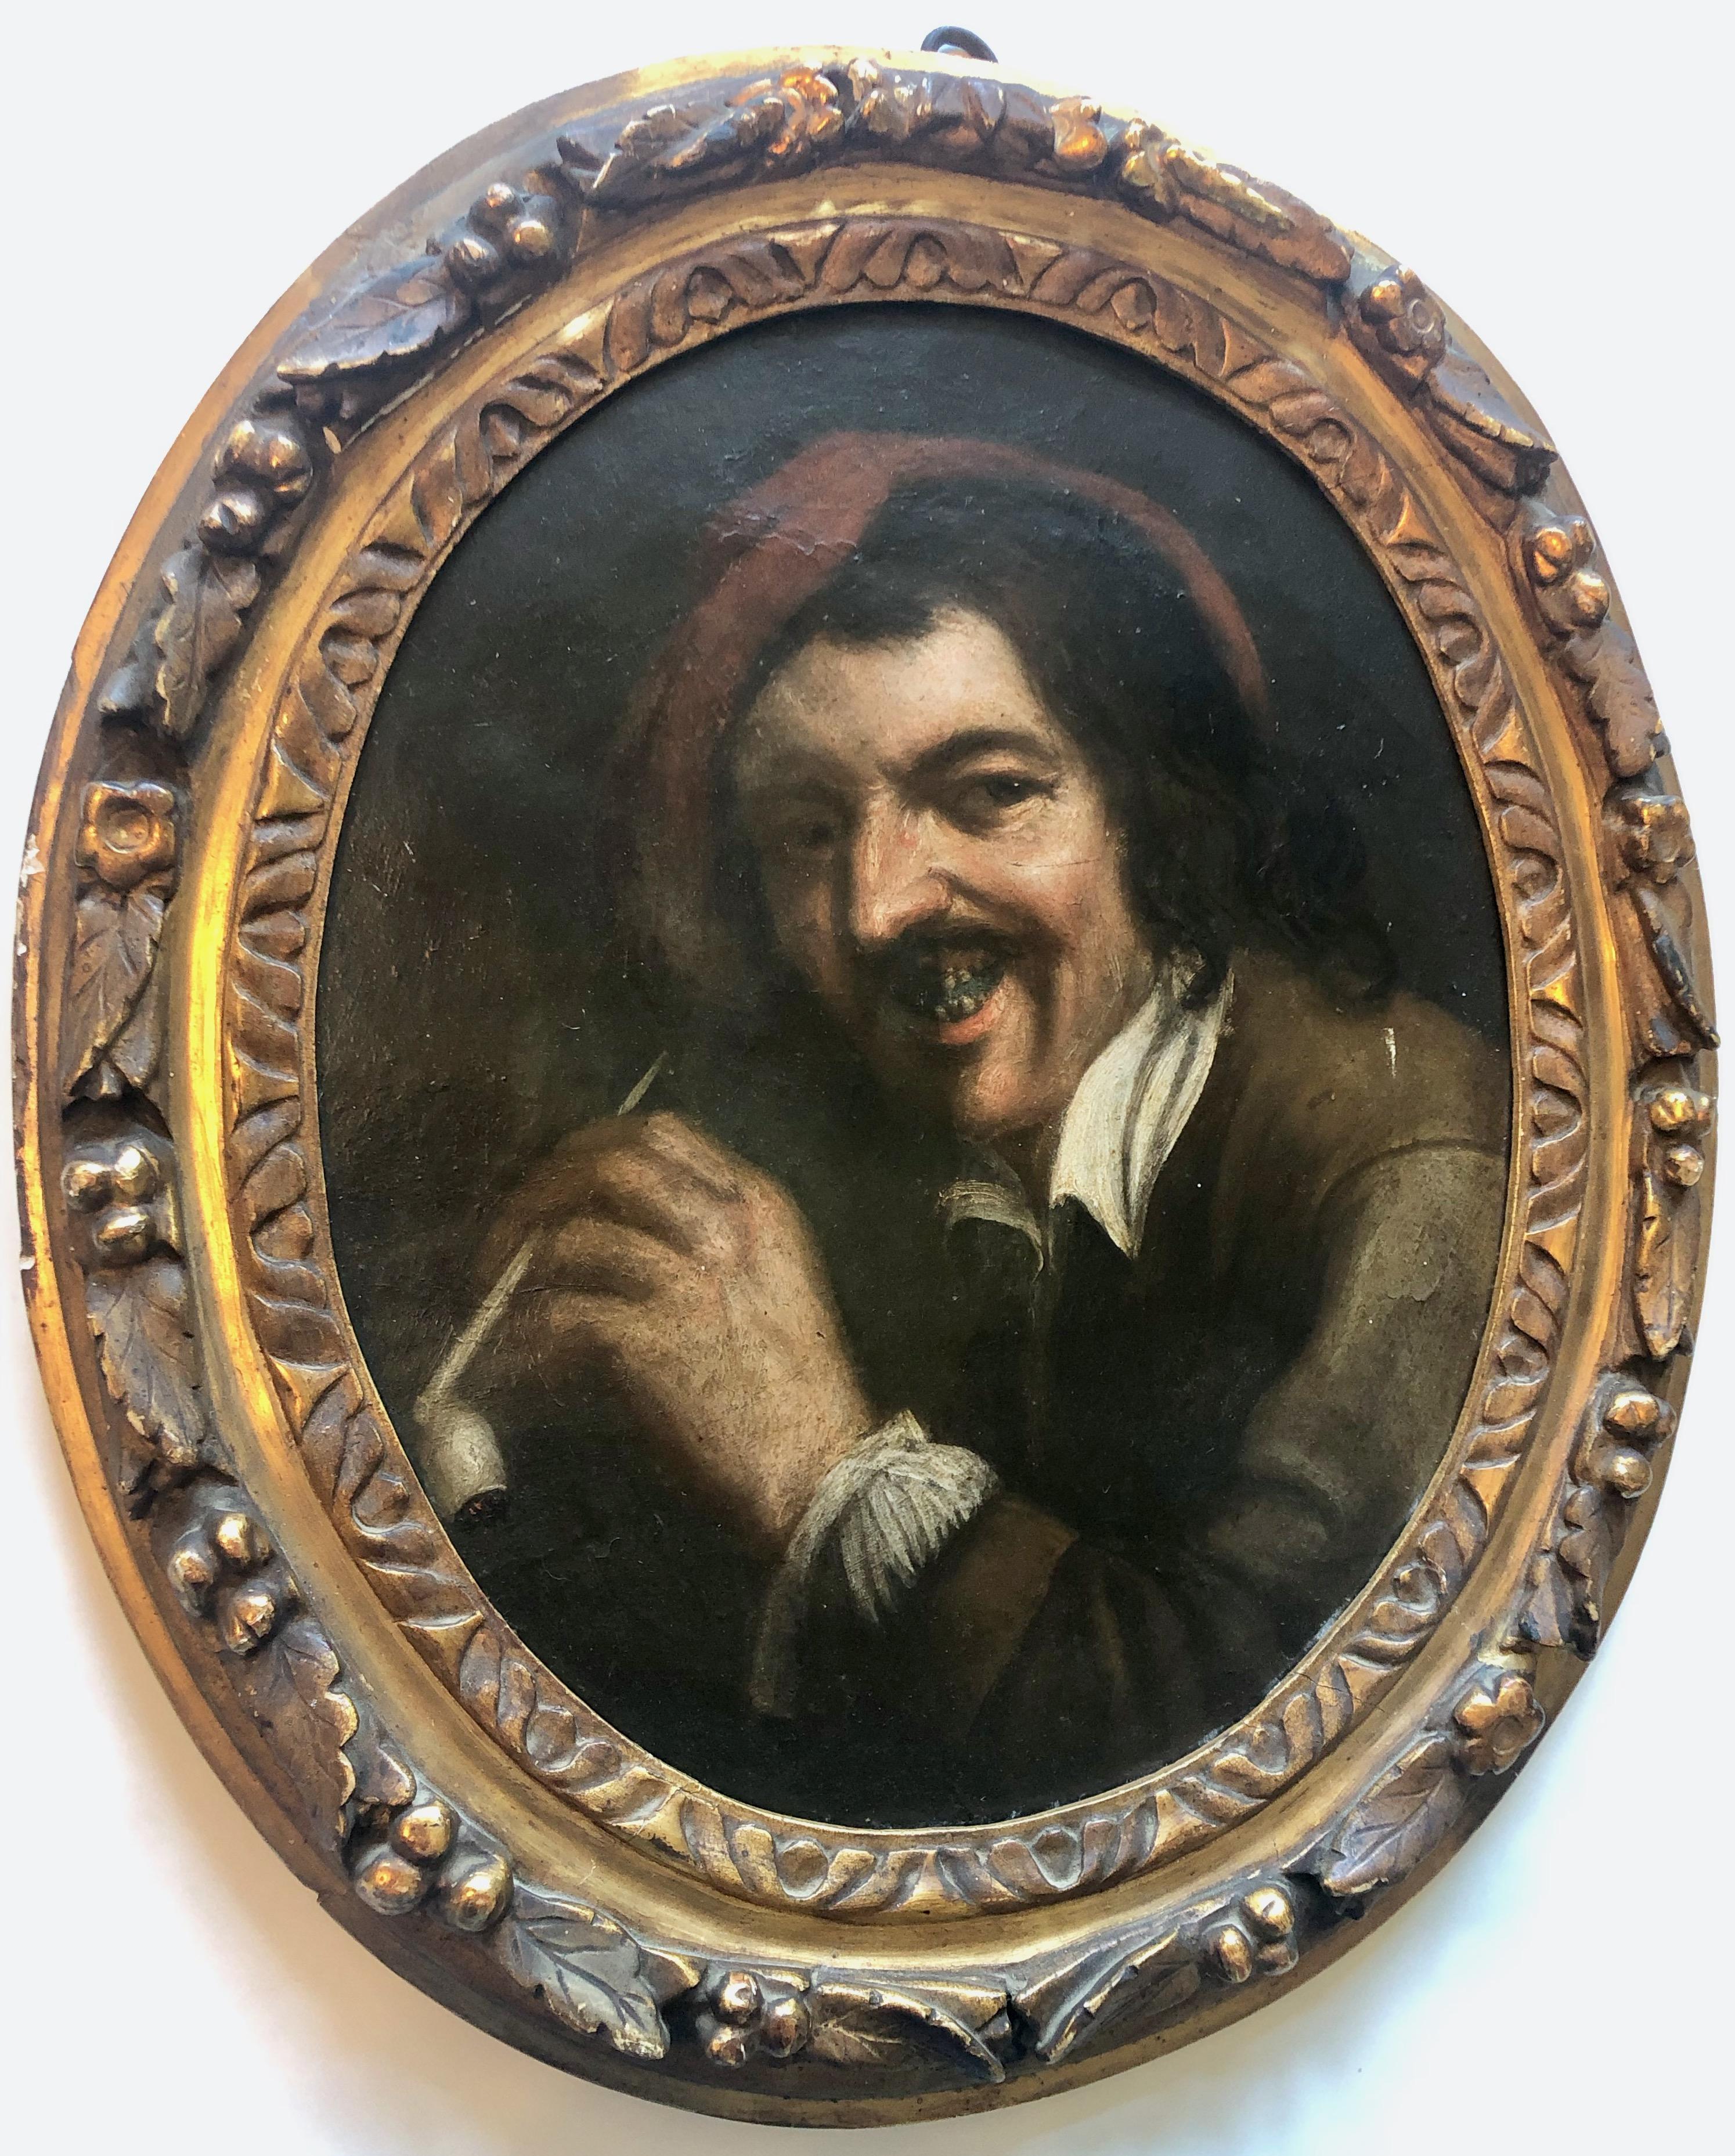 Gorgeous Framed 1700s Flemish Painting Oil on Canvas Representing a Pipe Smoker In Fair Condition For Sale In Petaluma, CA